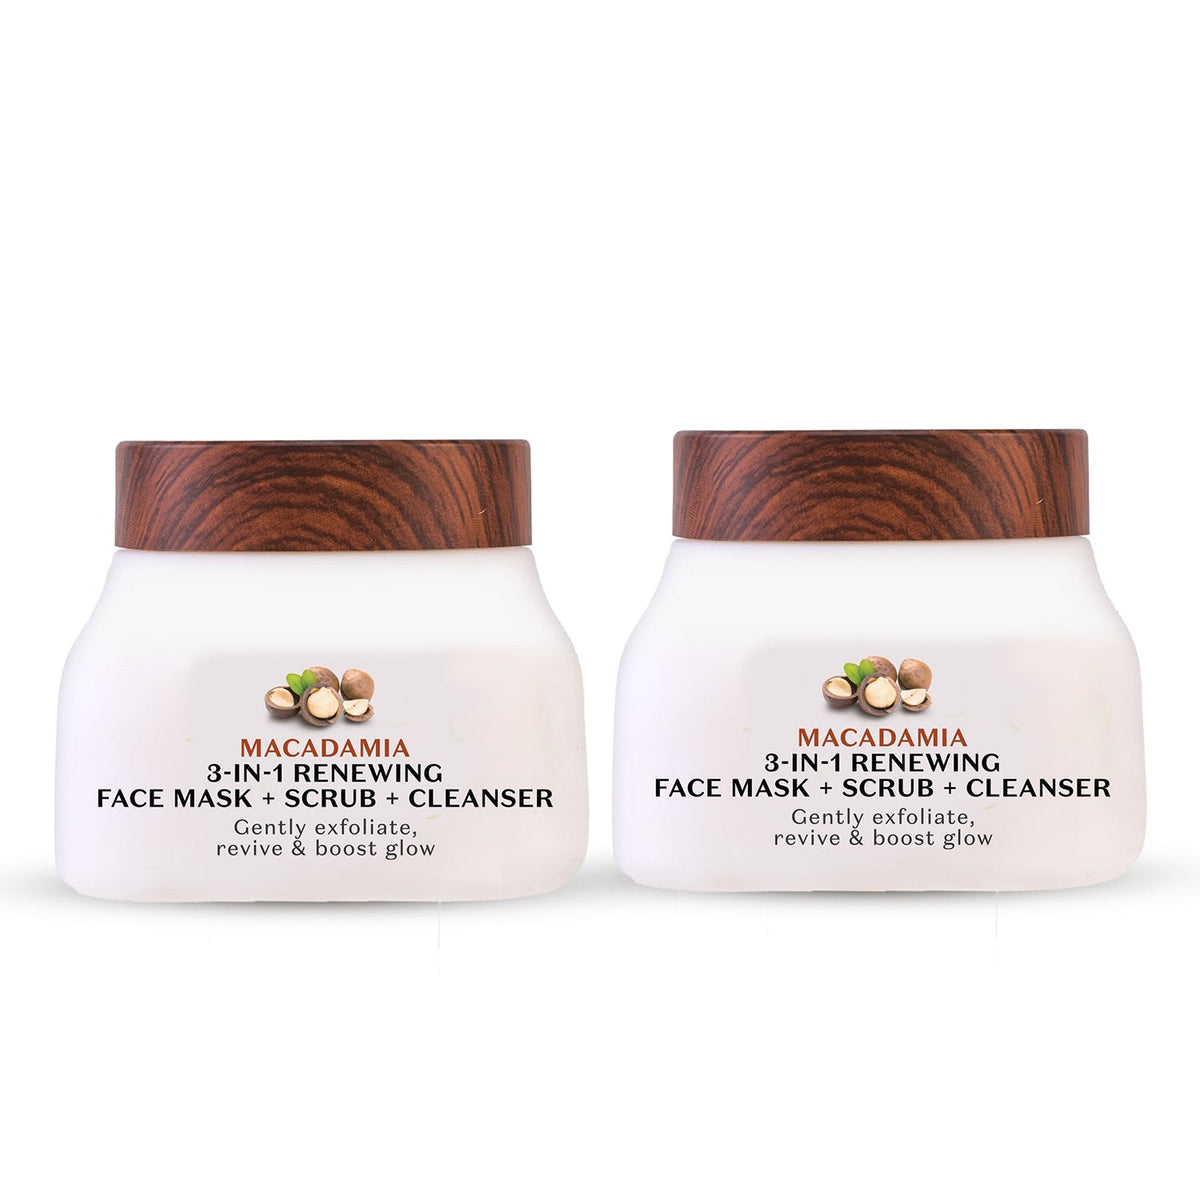 Macadamia 3 in 1 Renewing Face Mask, Scrub & Cleanser Combo | Pack of 2 | From the makers of Parachute Advansed | 280ml